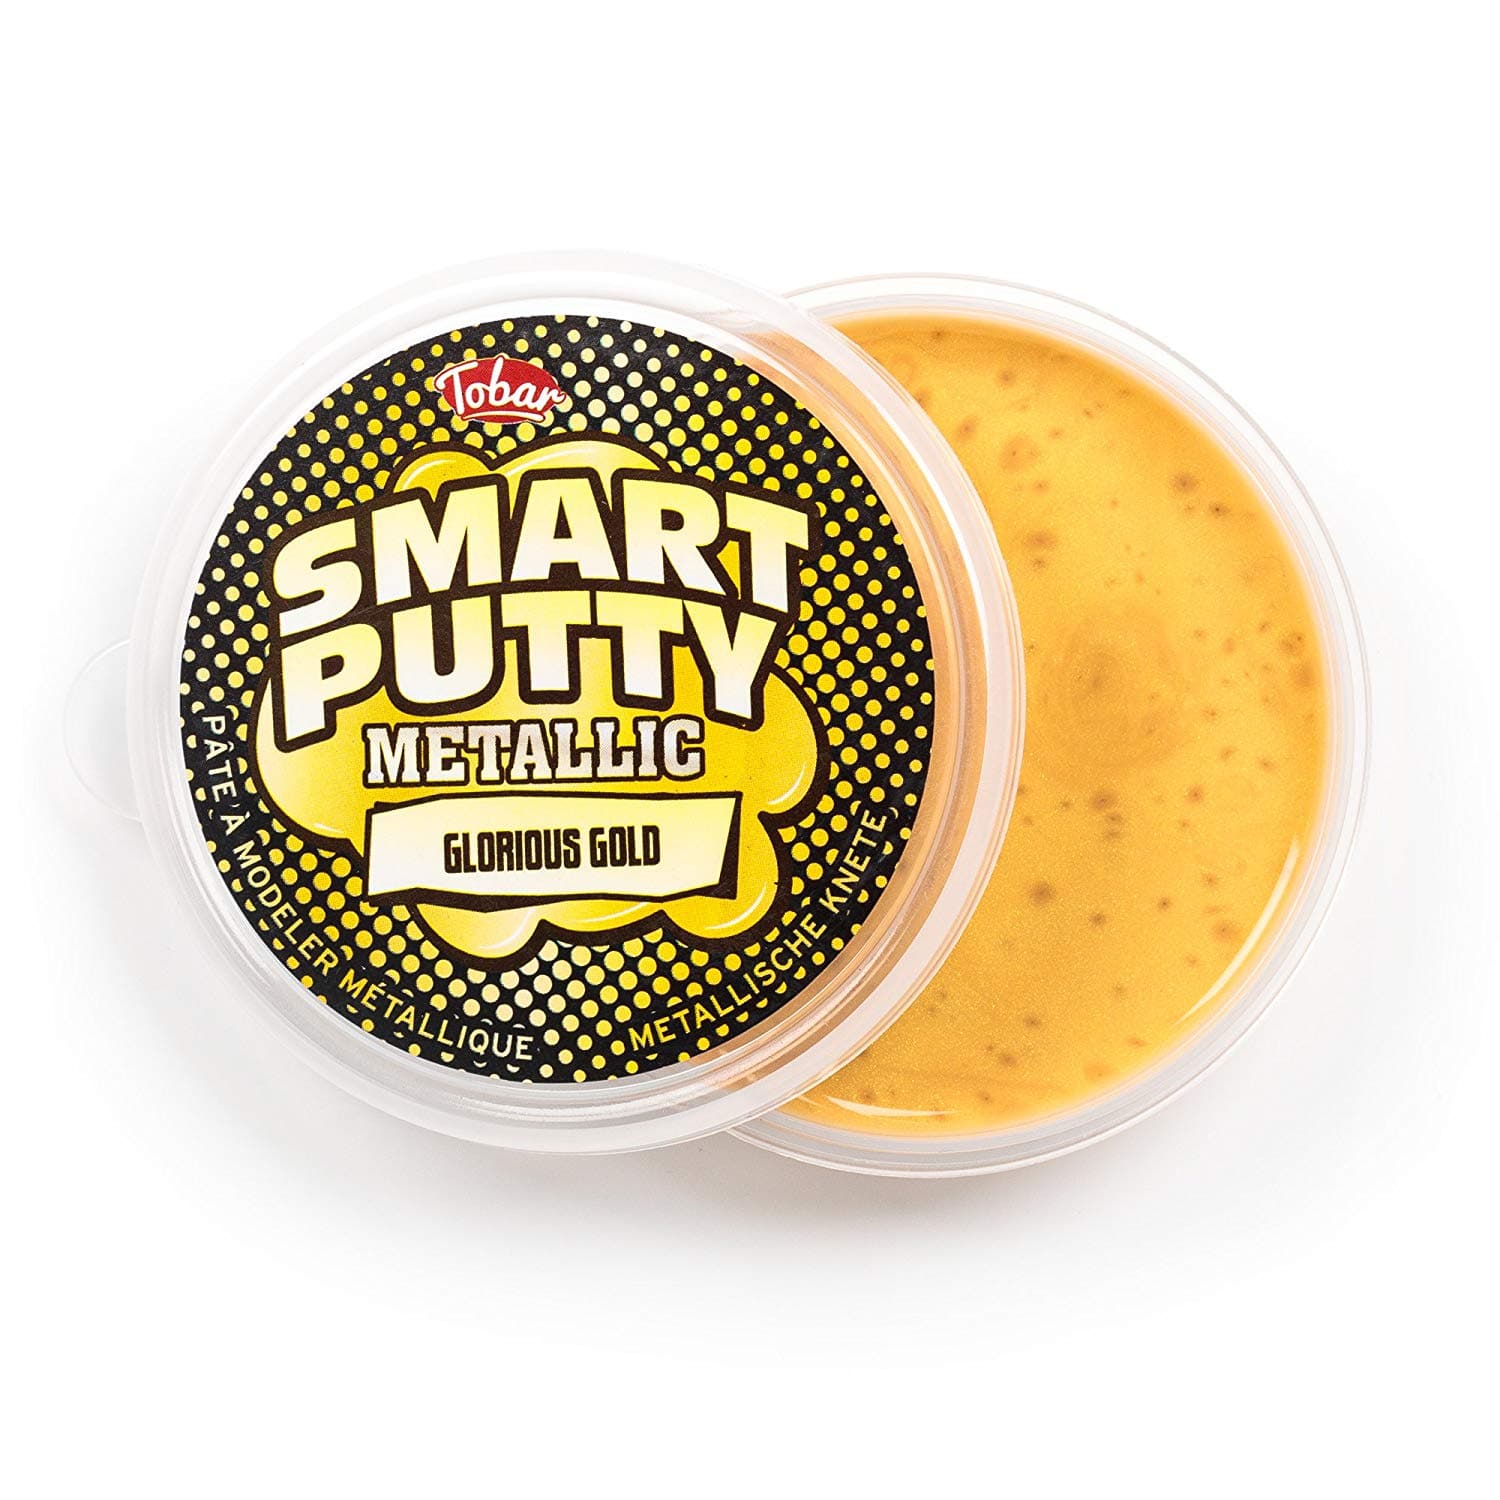 Mini Smart Putty, The Mini Smart Putty is the perfect pocket-sized toy that offers an incredibly fun and interesting tactile experience. This tiny pot of putty allows you to unleash your creativity and have hours of endless fun.With this putty, the possibilities are endless. You can mold it into any shape you desire, stretch it to your heart's content, and even bounce it like a rubber ball. The Mini Smart Putty is incredibly flexible and pliable, allowing you to create unique and impressive designs.One of t